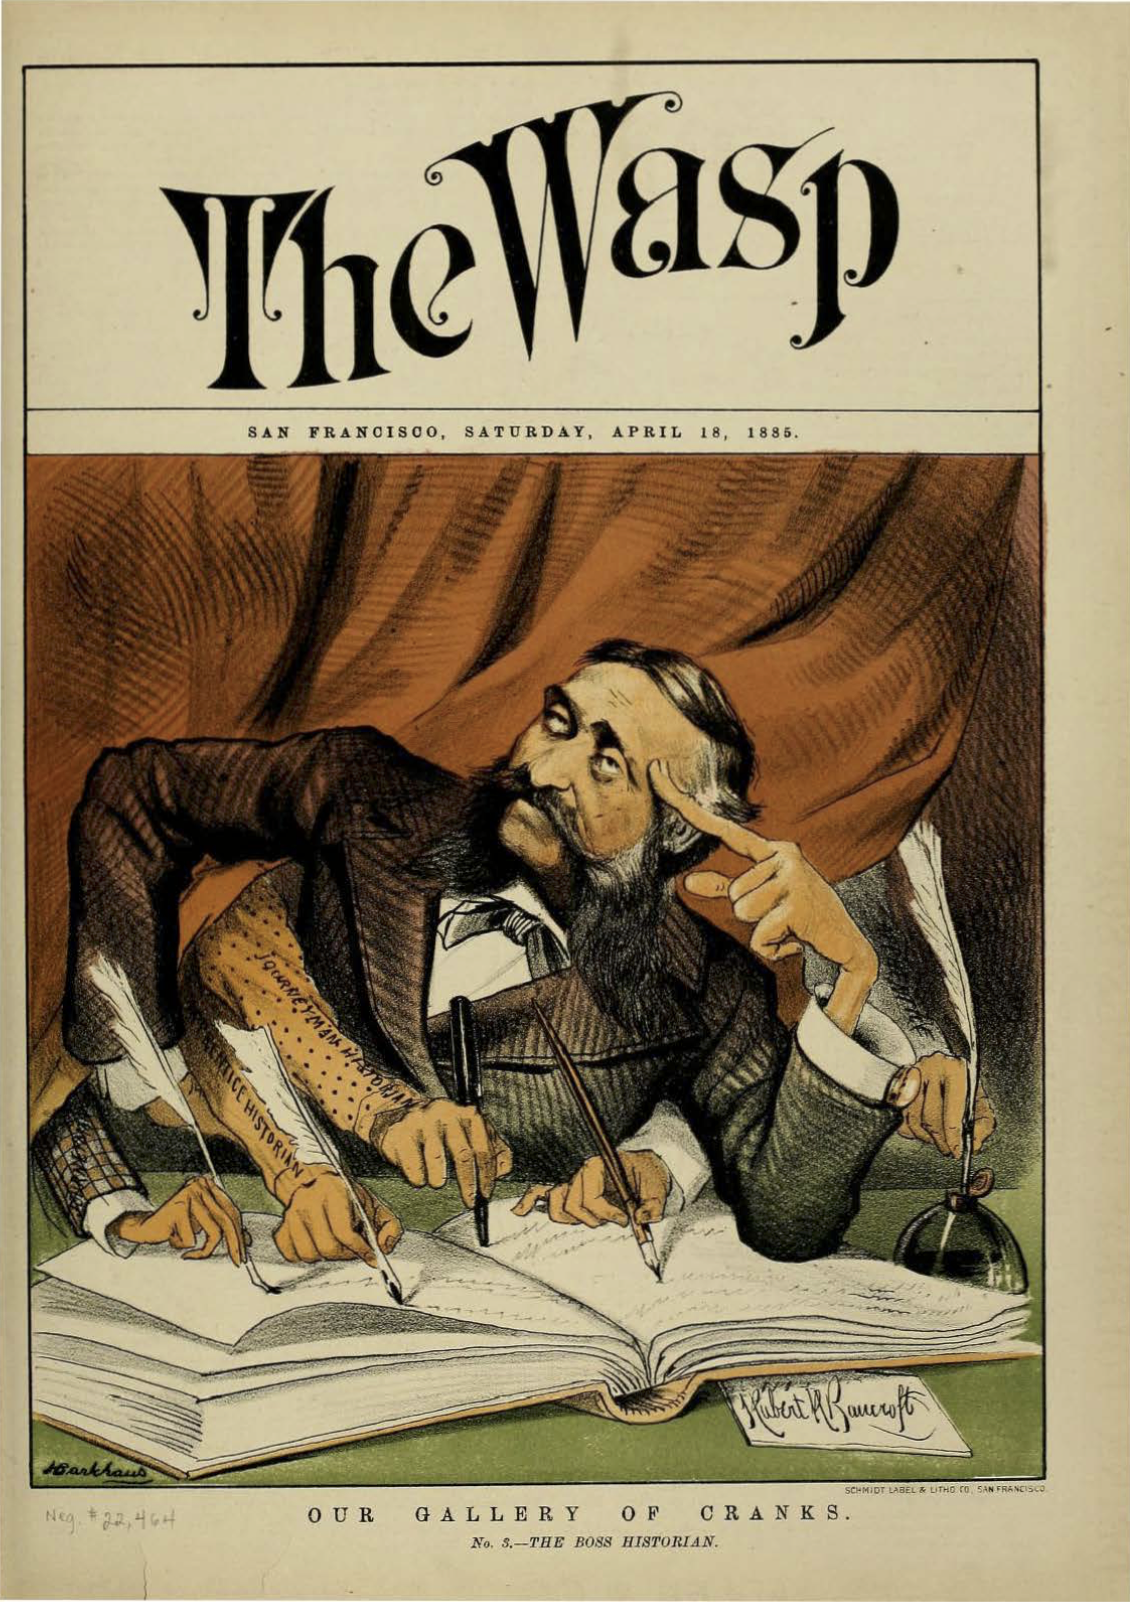 Our Gallery of Cranks No. 5—The Boss Historian, from The Wasp, 18 April 1885, San Francisco, California.